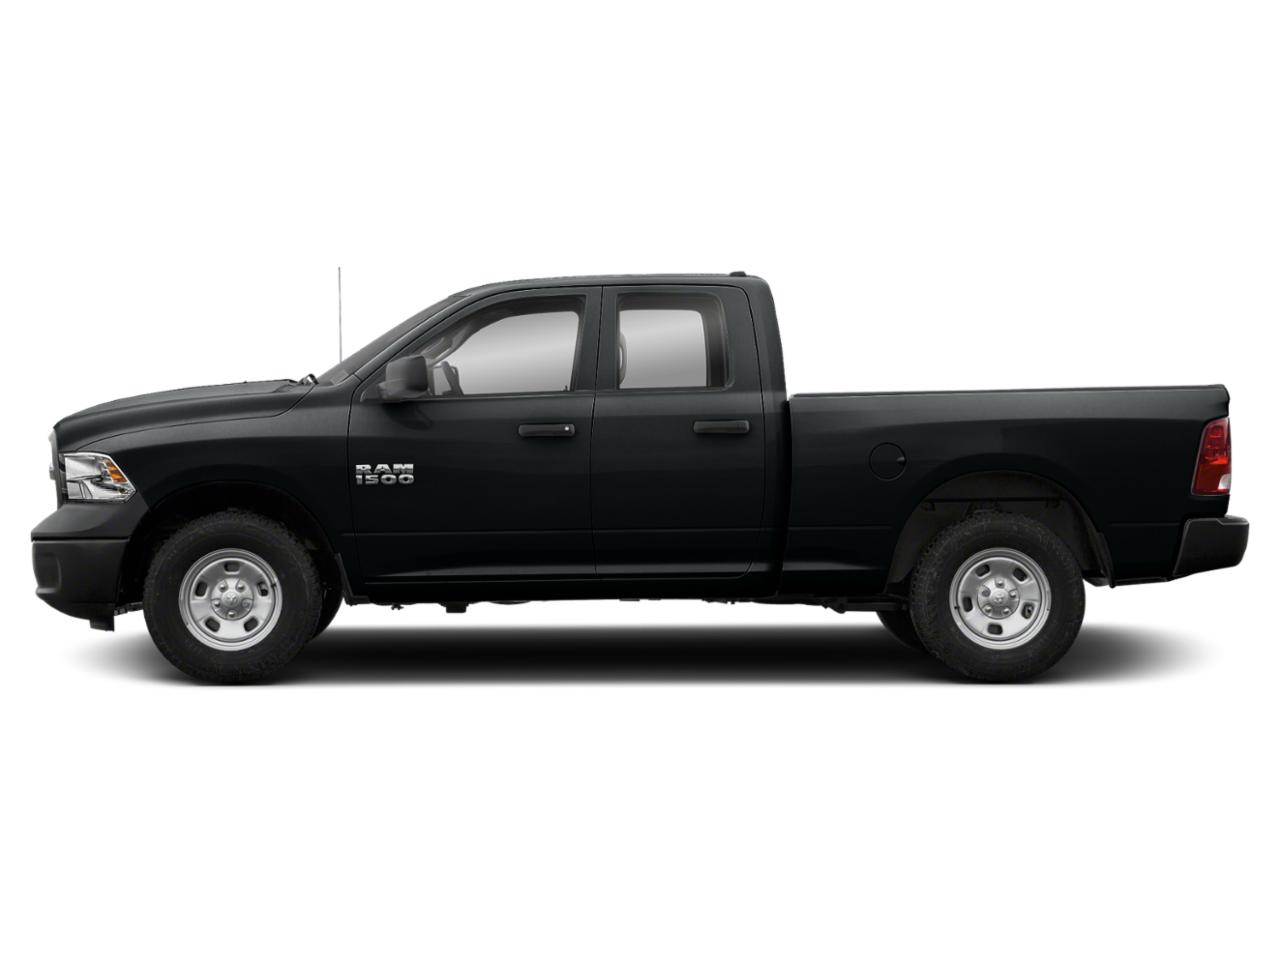 Used 2015 RAM Ram 1500 Pickup Express with VIN 1C6RR7FT4FS657217 for sale in Hopkinsville, KY